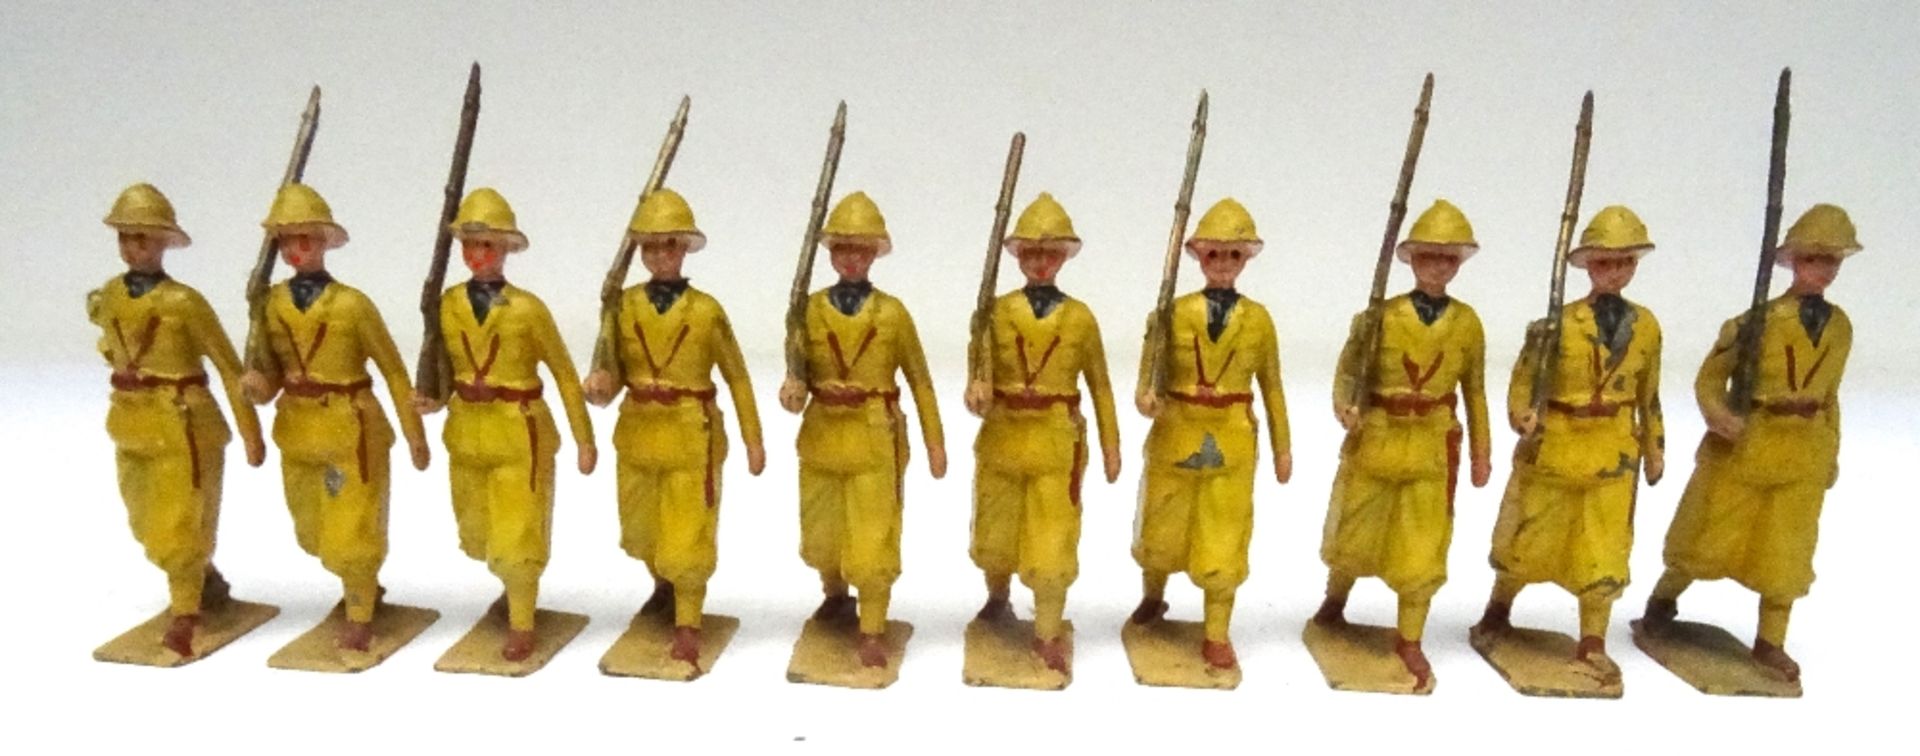 Britains set 1436, Italian Infantry in Colonial Service dress - Image 2 of 4